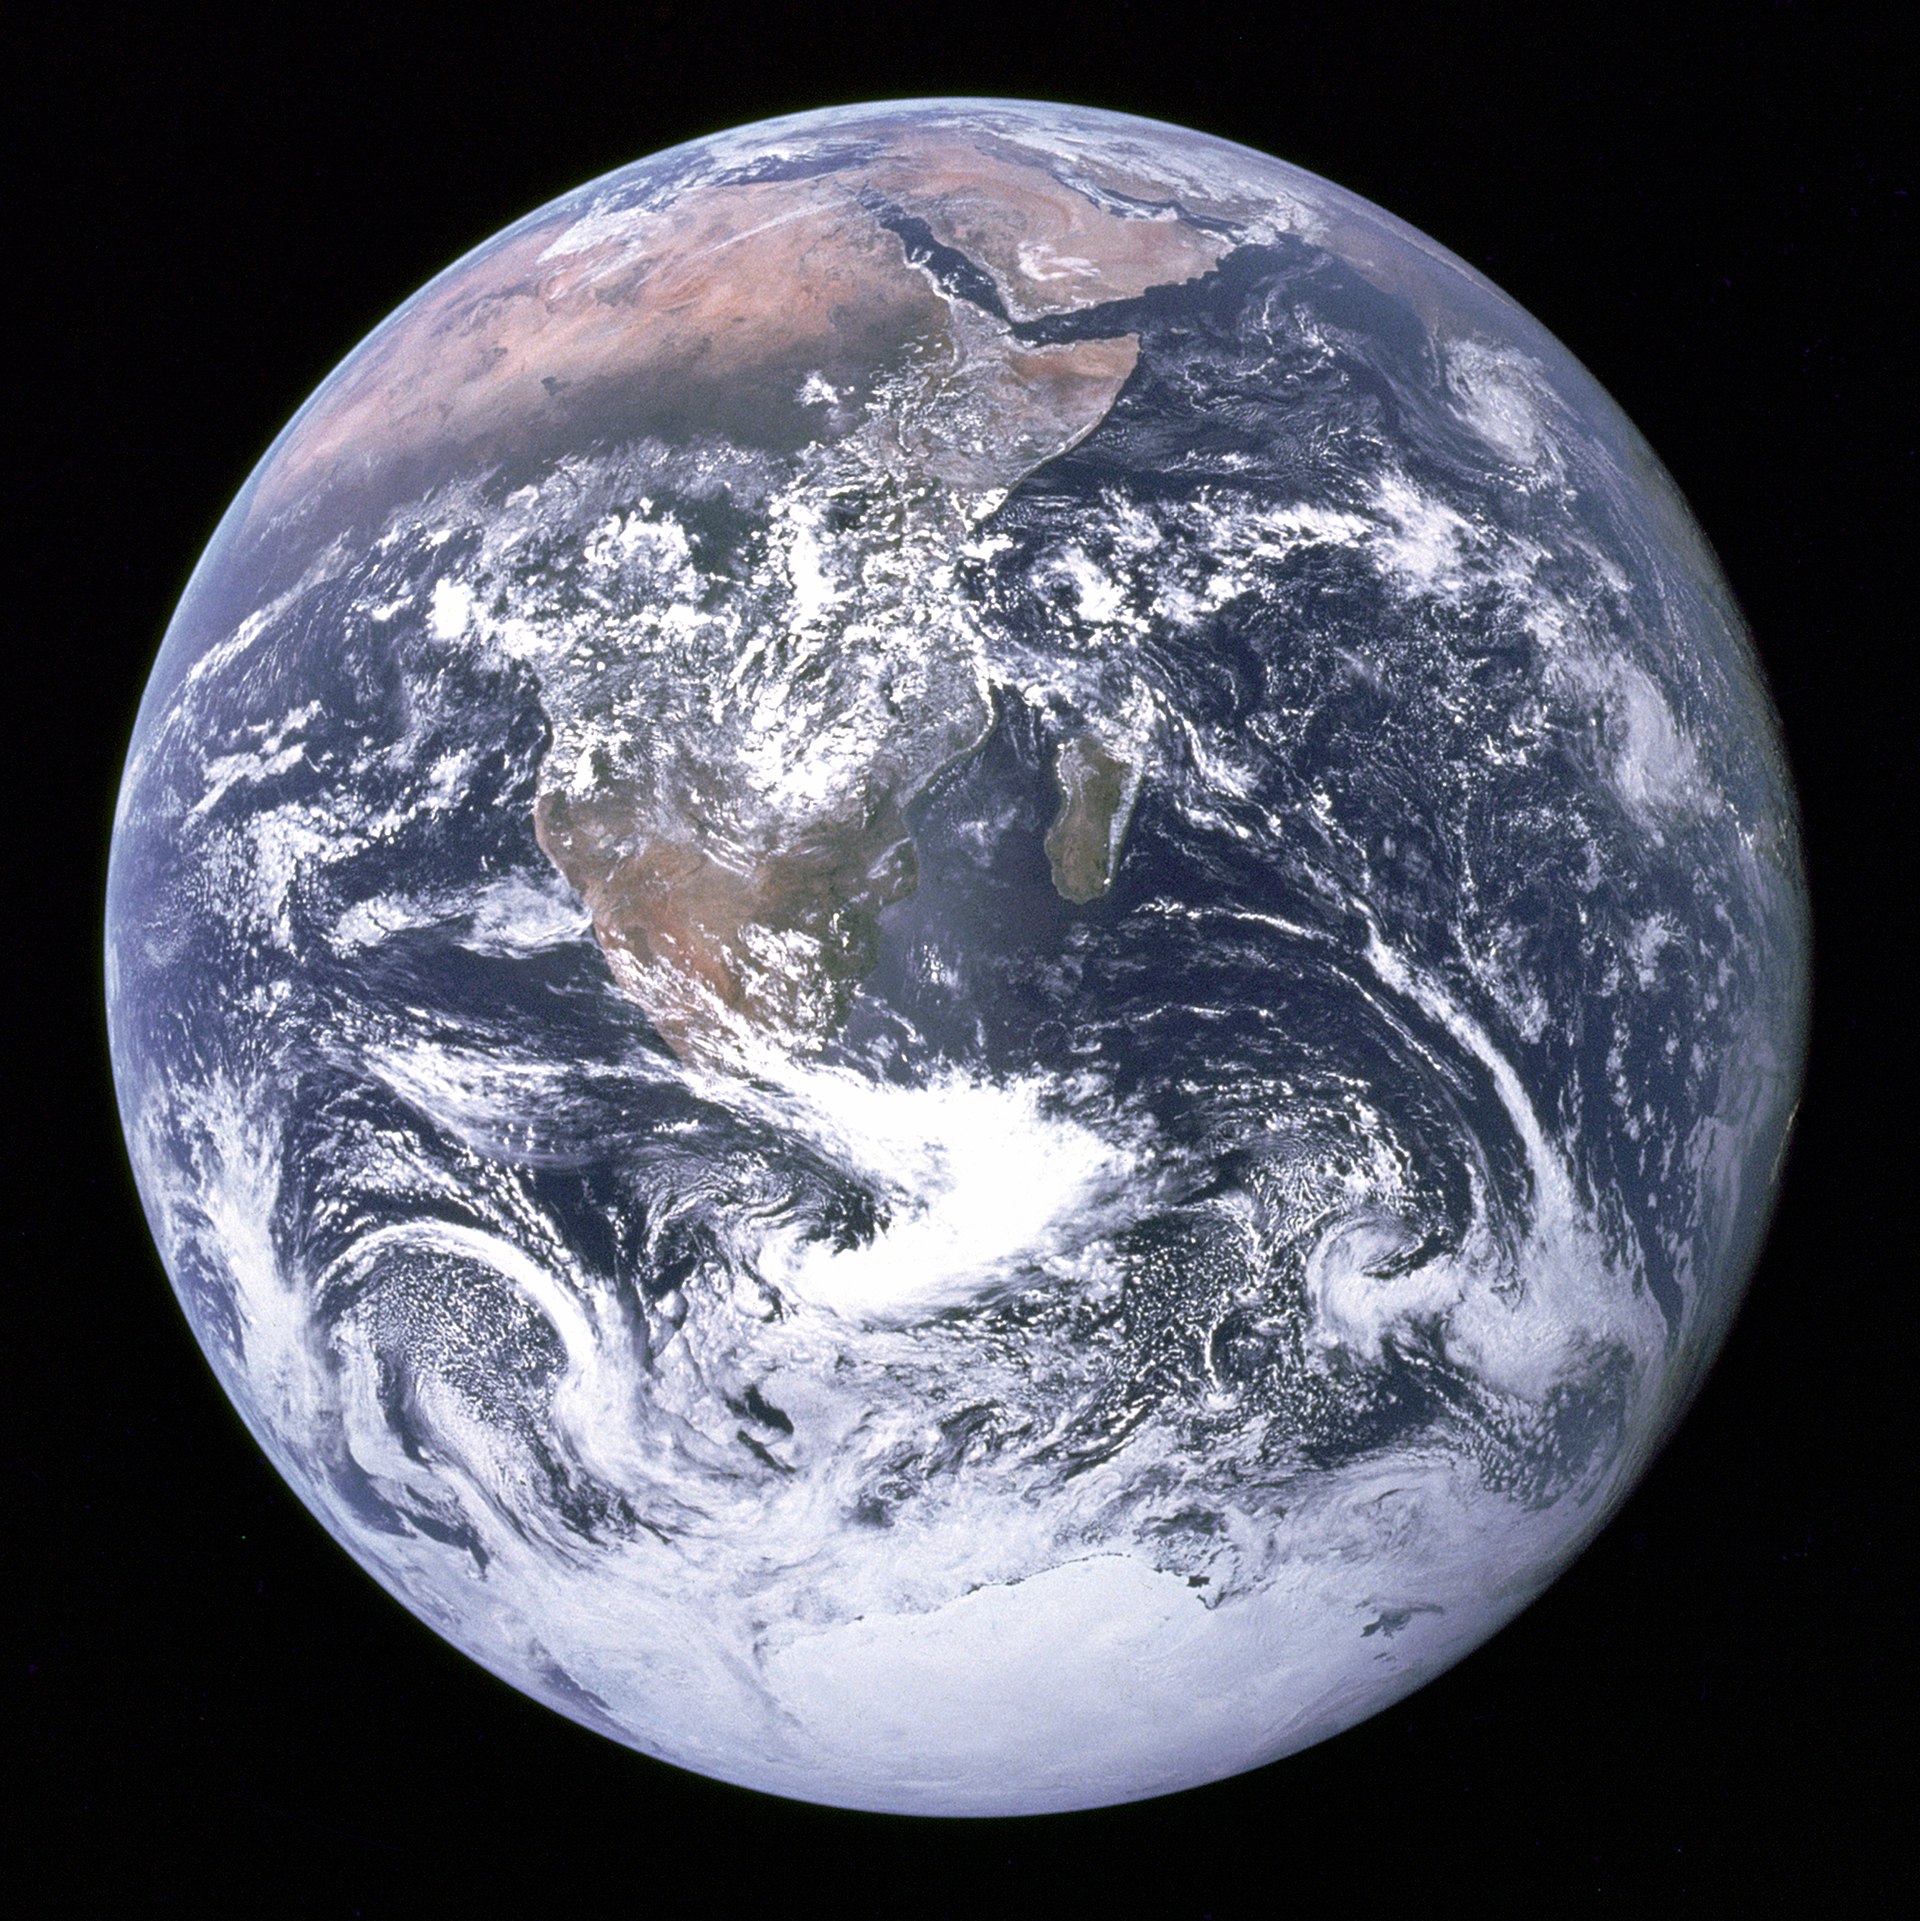 The Blue Marble, taken by the Apollo 17 crew in 1972.